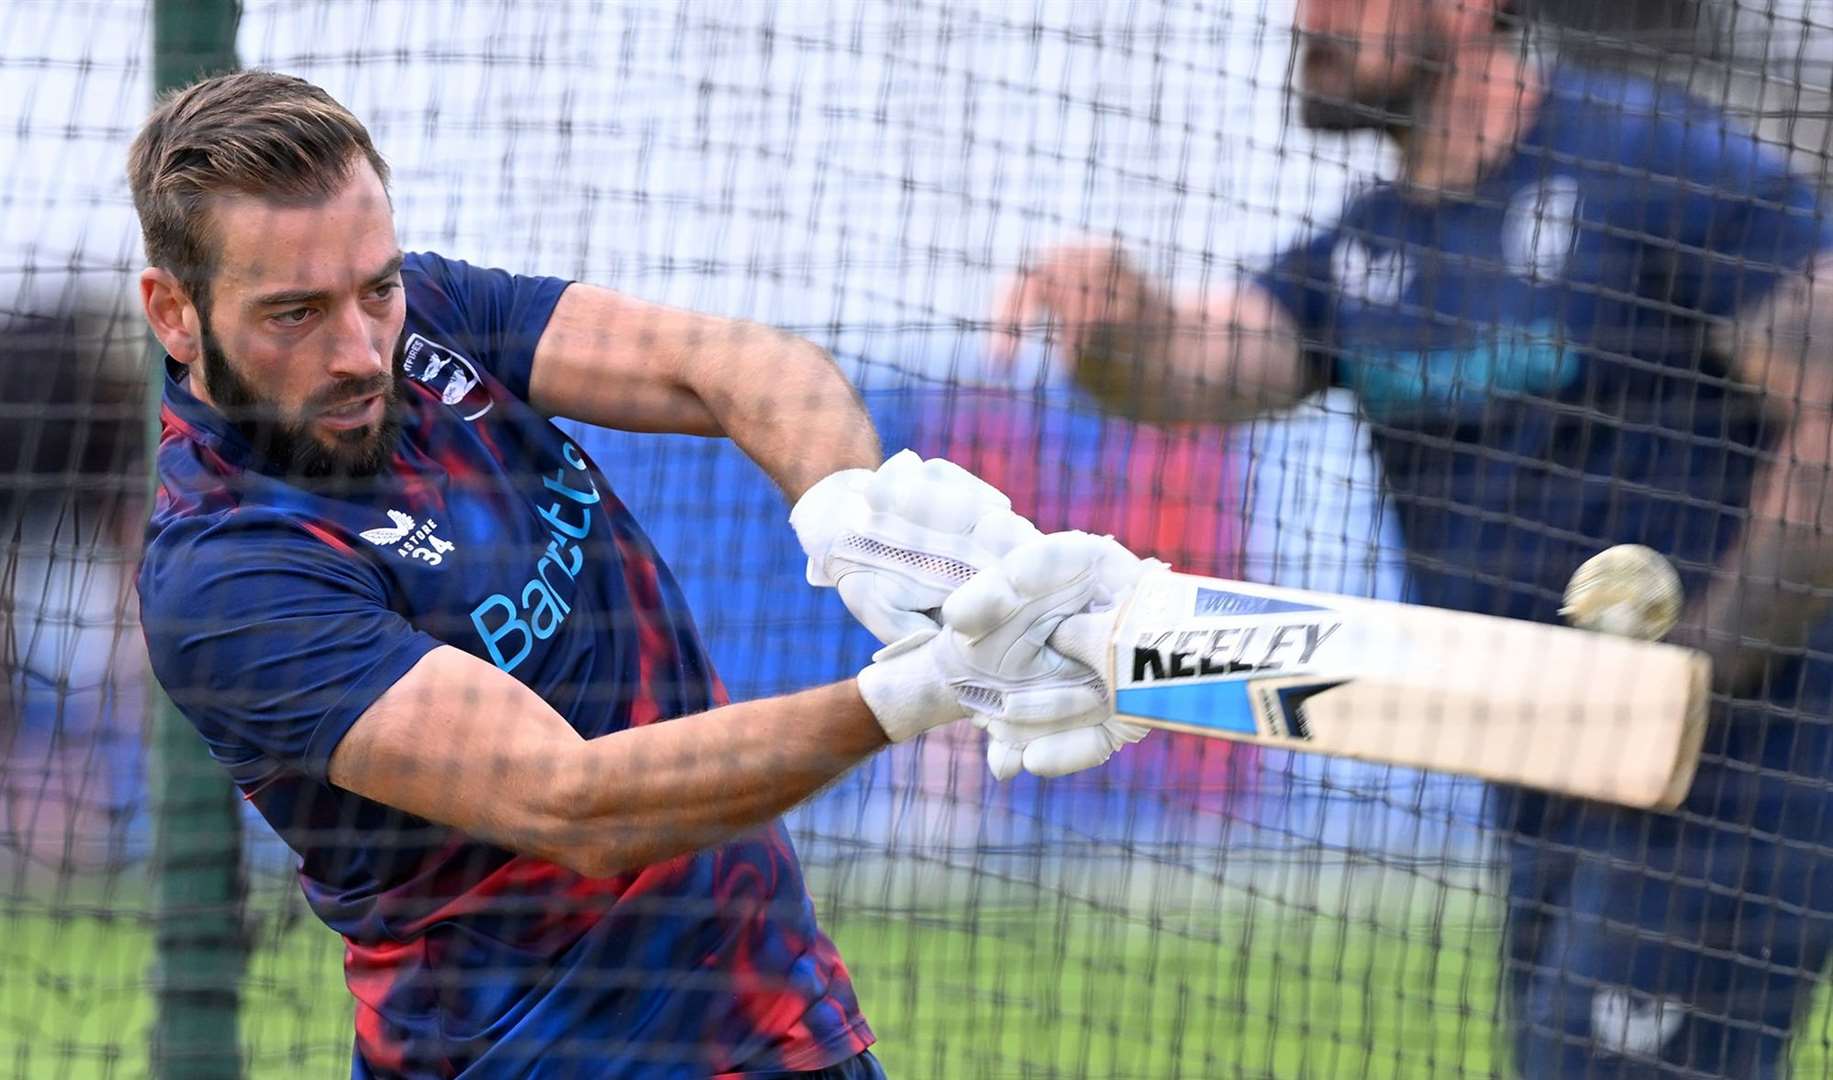 Batsman Jack Leaning – replaced Sam Billings as Kent’s red-ball skipper in June and is among the leading candidates to take on the captaincy role. Picture: Keith Gillard